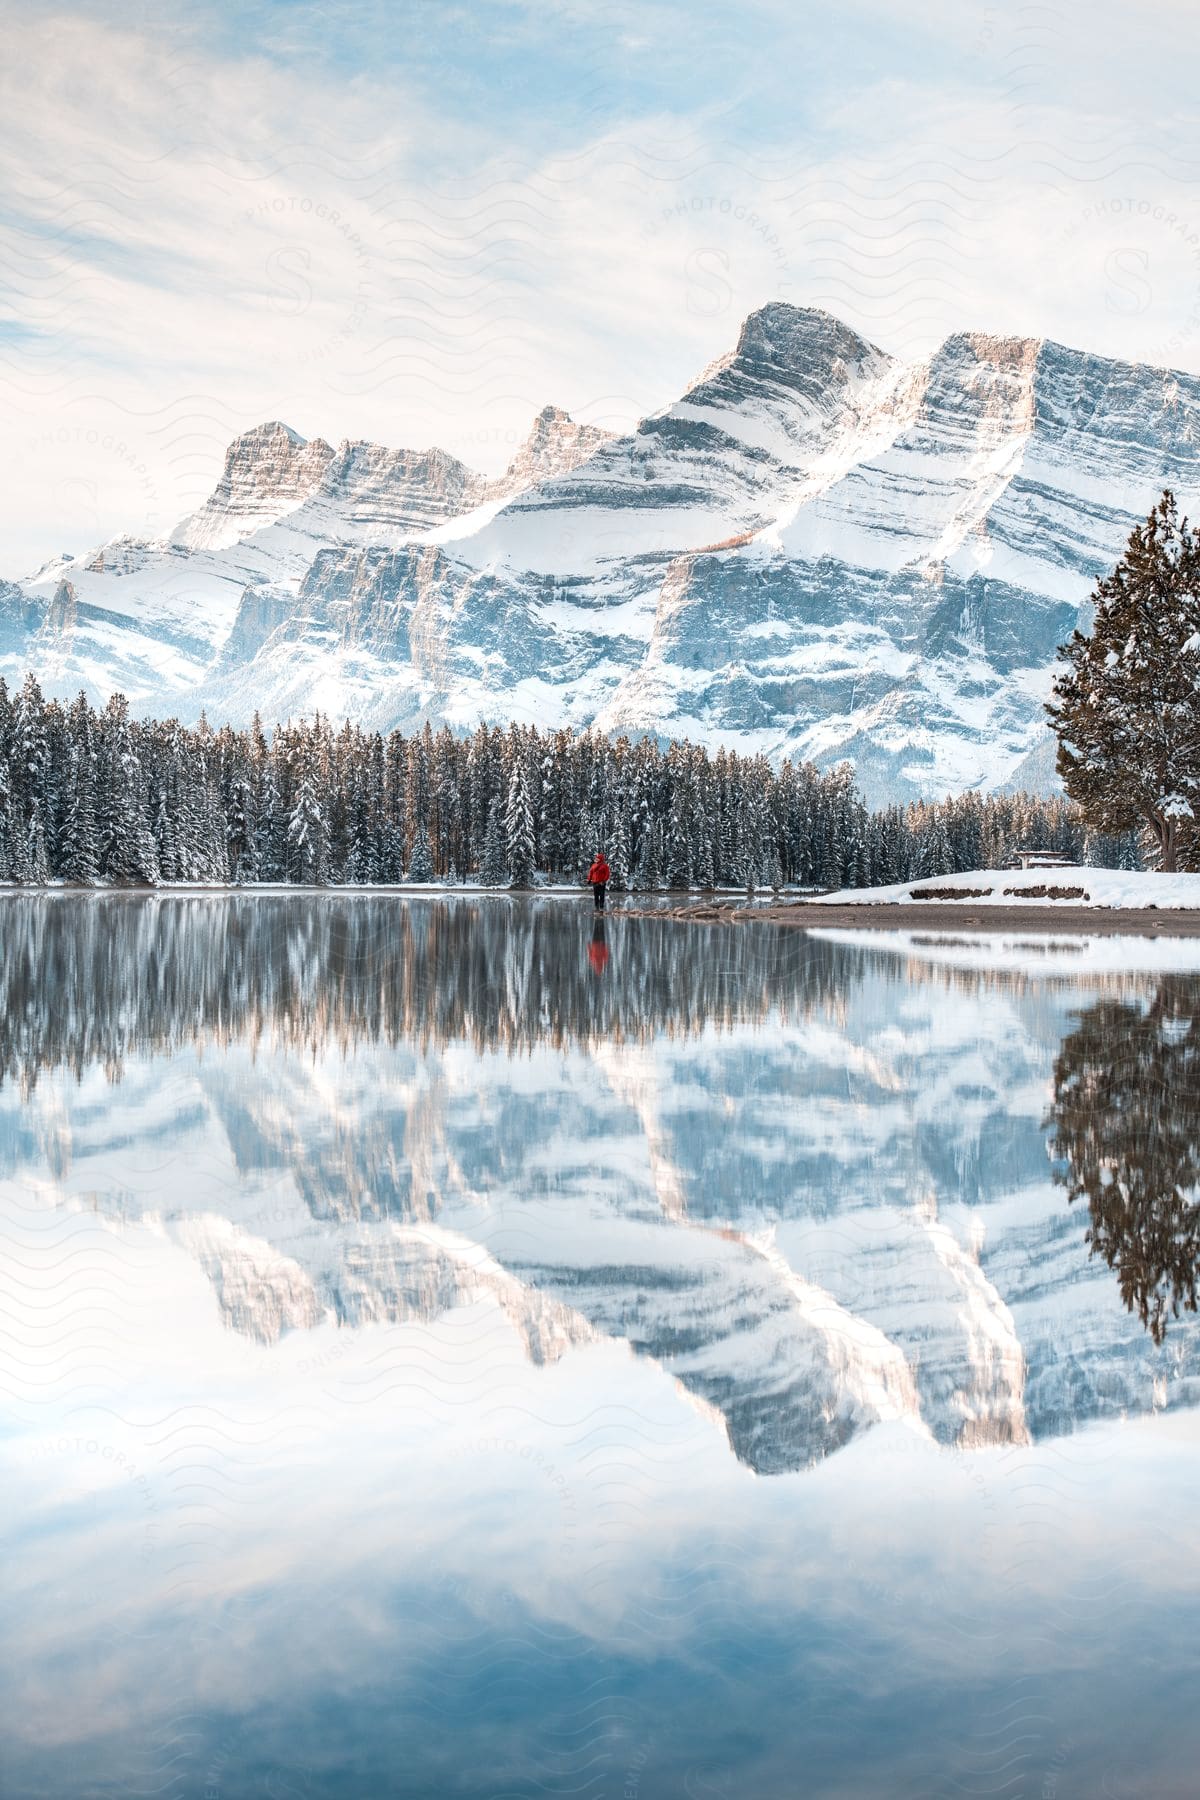 A person wearing a red coat and black pants stands by two jack lake in canada